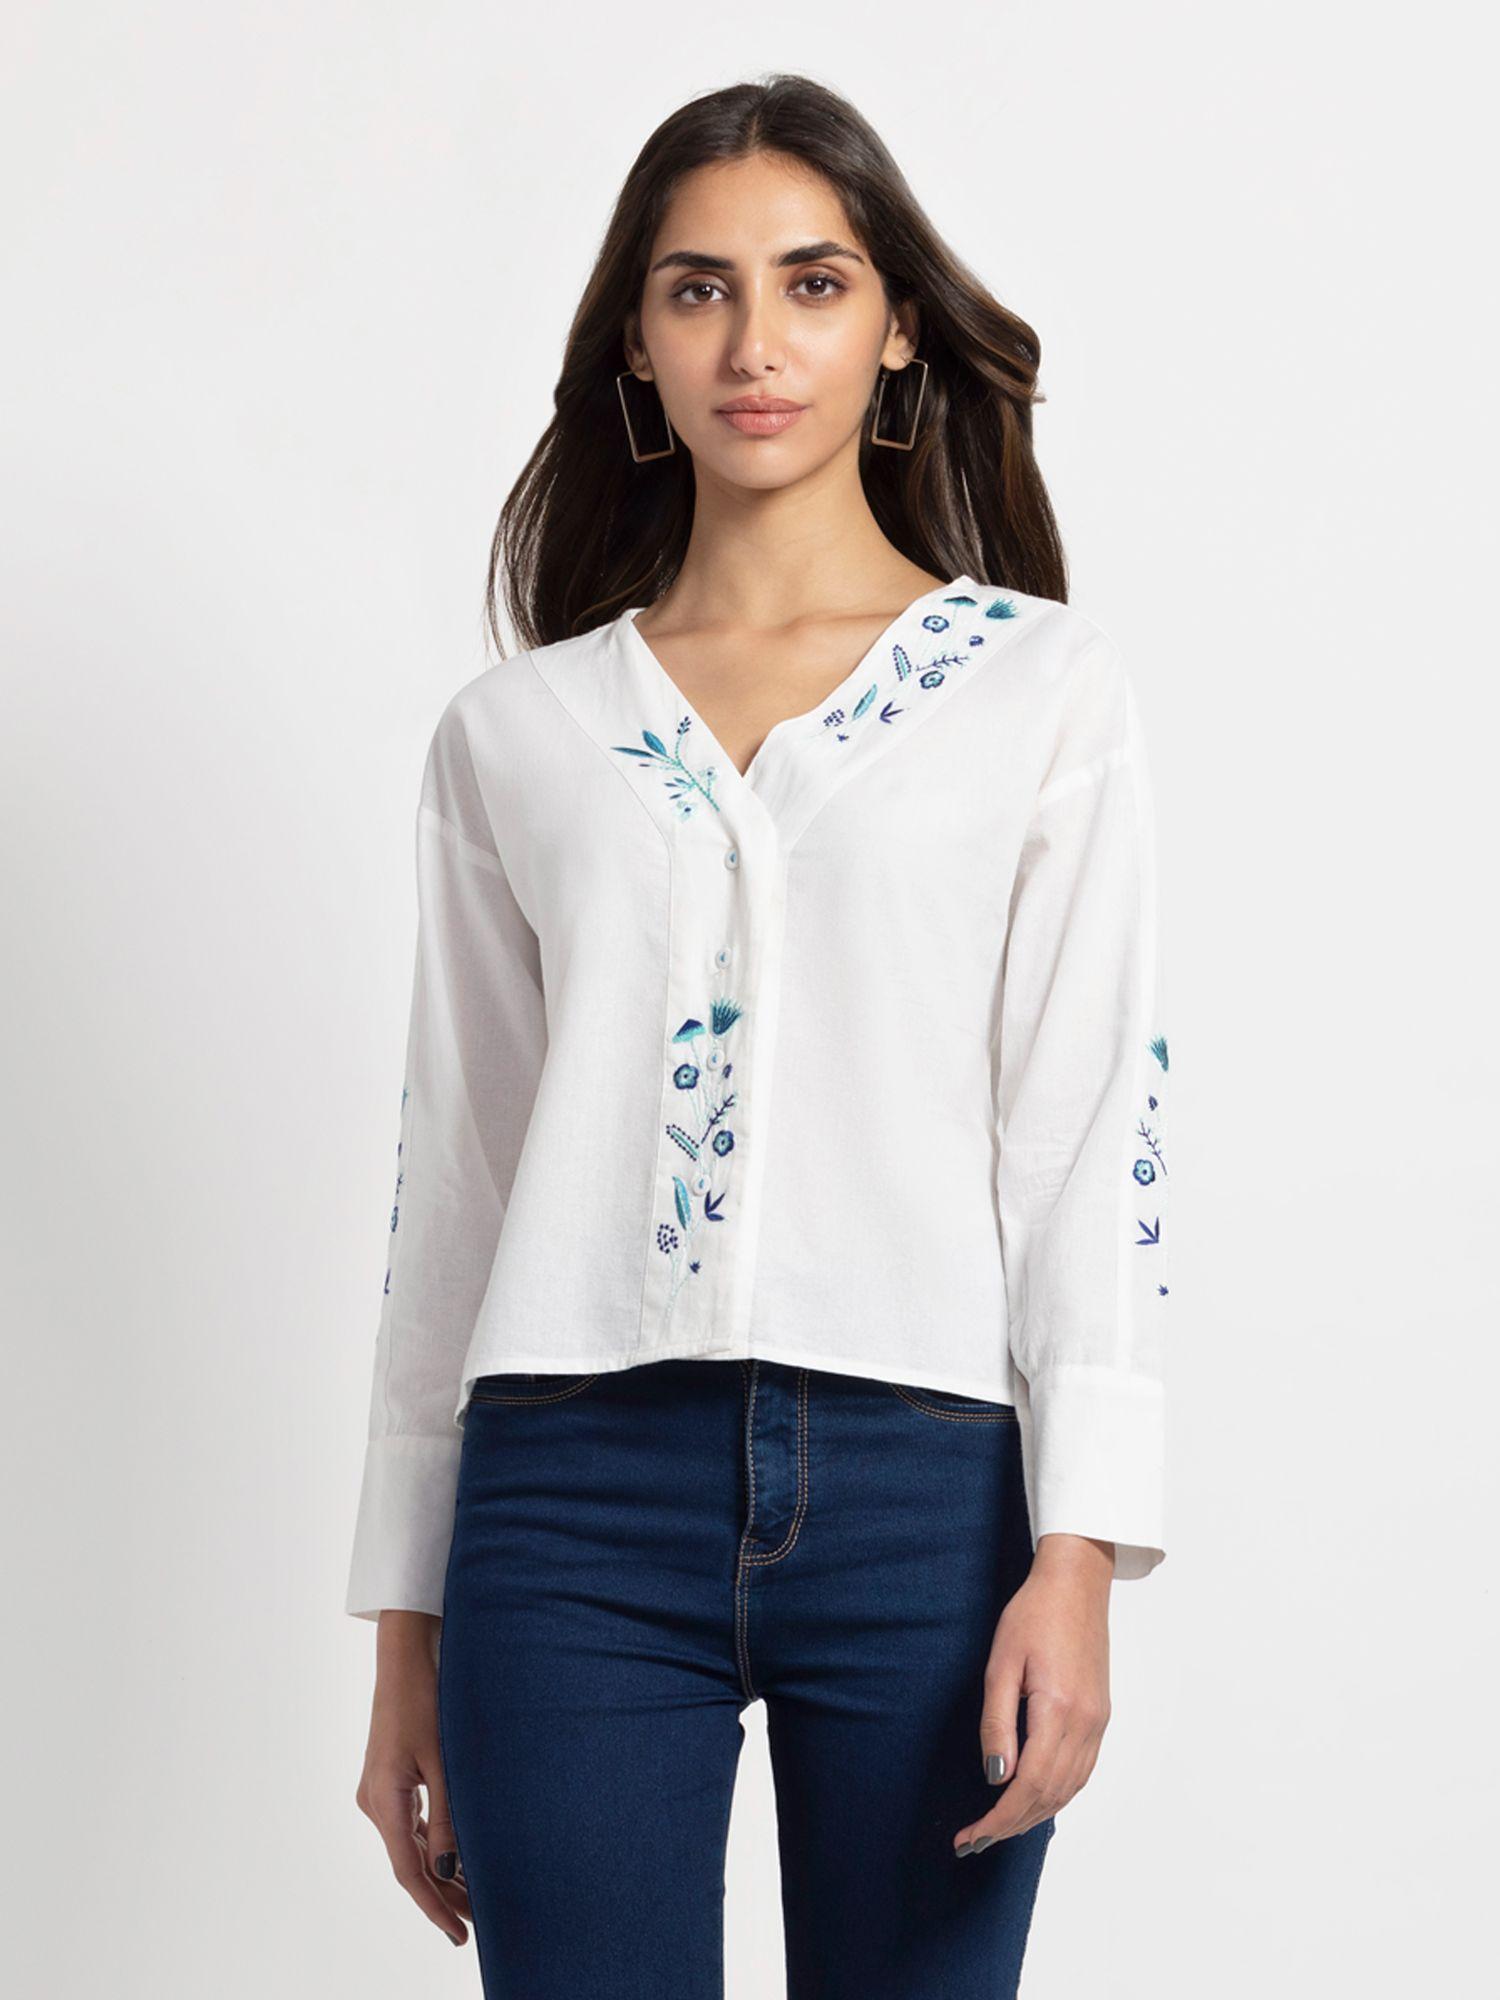 v-neck-white-embroidered-long-sleeves-casual-shirt-for-women